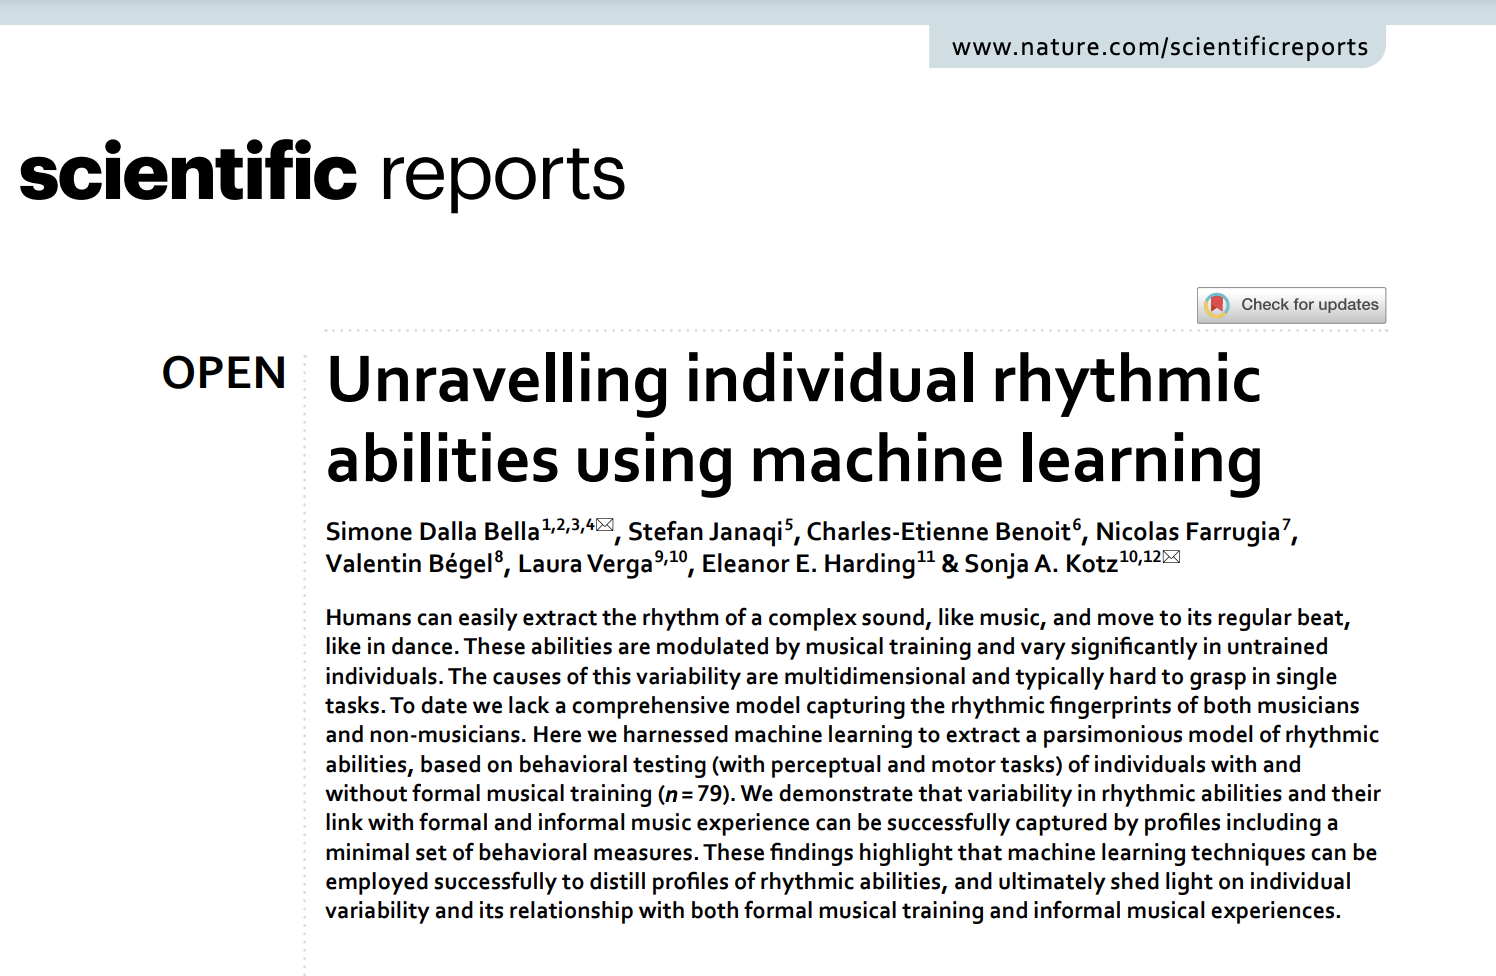 Unravelling individual rhythmic abilities using machine learning